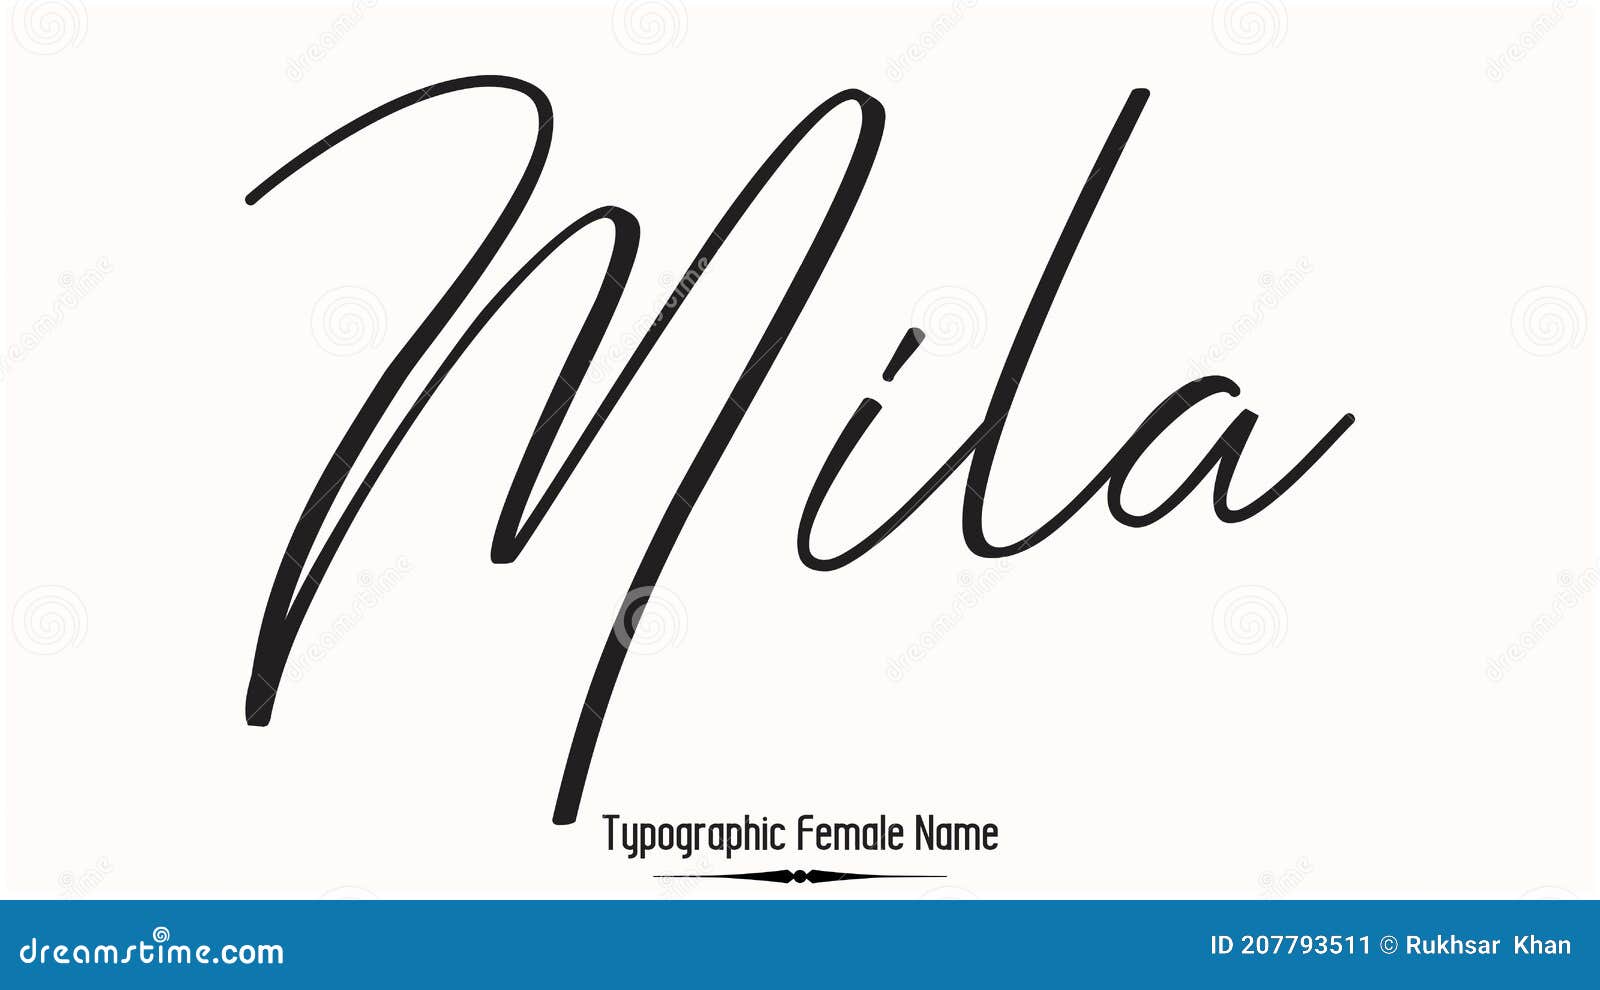 mila female name - in stylish lettering cursive typography text